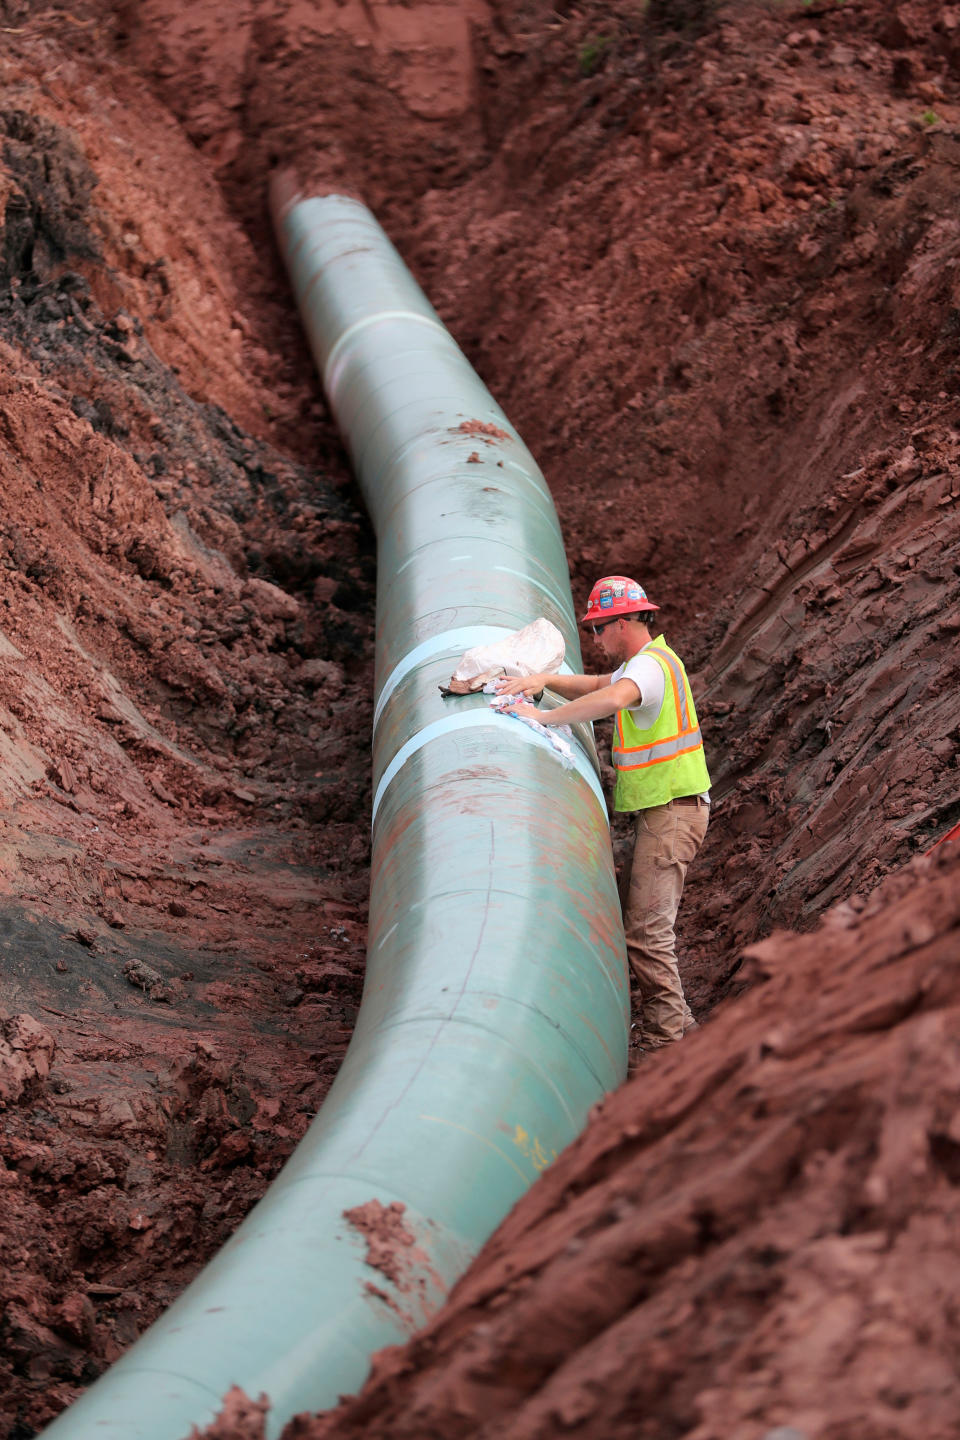 FILE - In this Aug. 21, 2017, file photo, a pipe fitter lays the finishing touches to the replacement of Enbridge Energy's Line 3 crude oil pipeline stretch in Superior, Wisc. After President Joe Biden revoked Keystone XL's presidential permit and shut down construction of the long-disputed pipeline that was to carry oil from Canada to Texas, opponents of other pipelines hoped the projects they've been fighting would be next.(Richard Tsong-Taatarii /Star Tribune via AP)